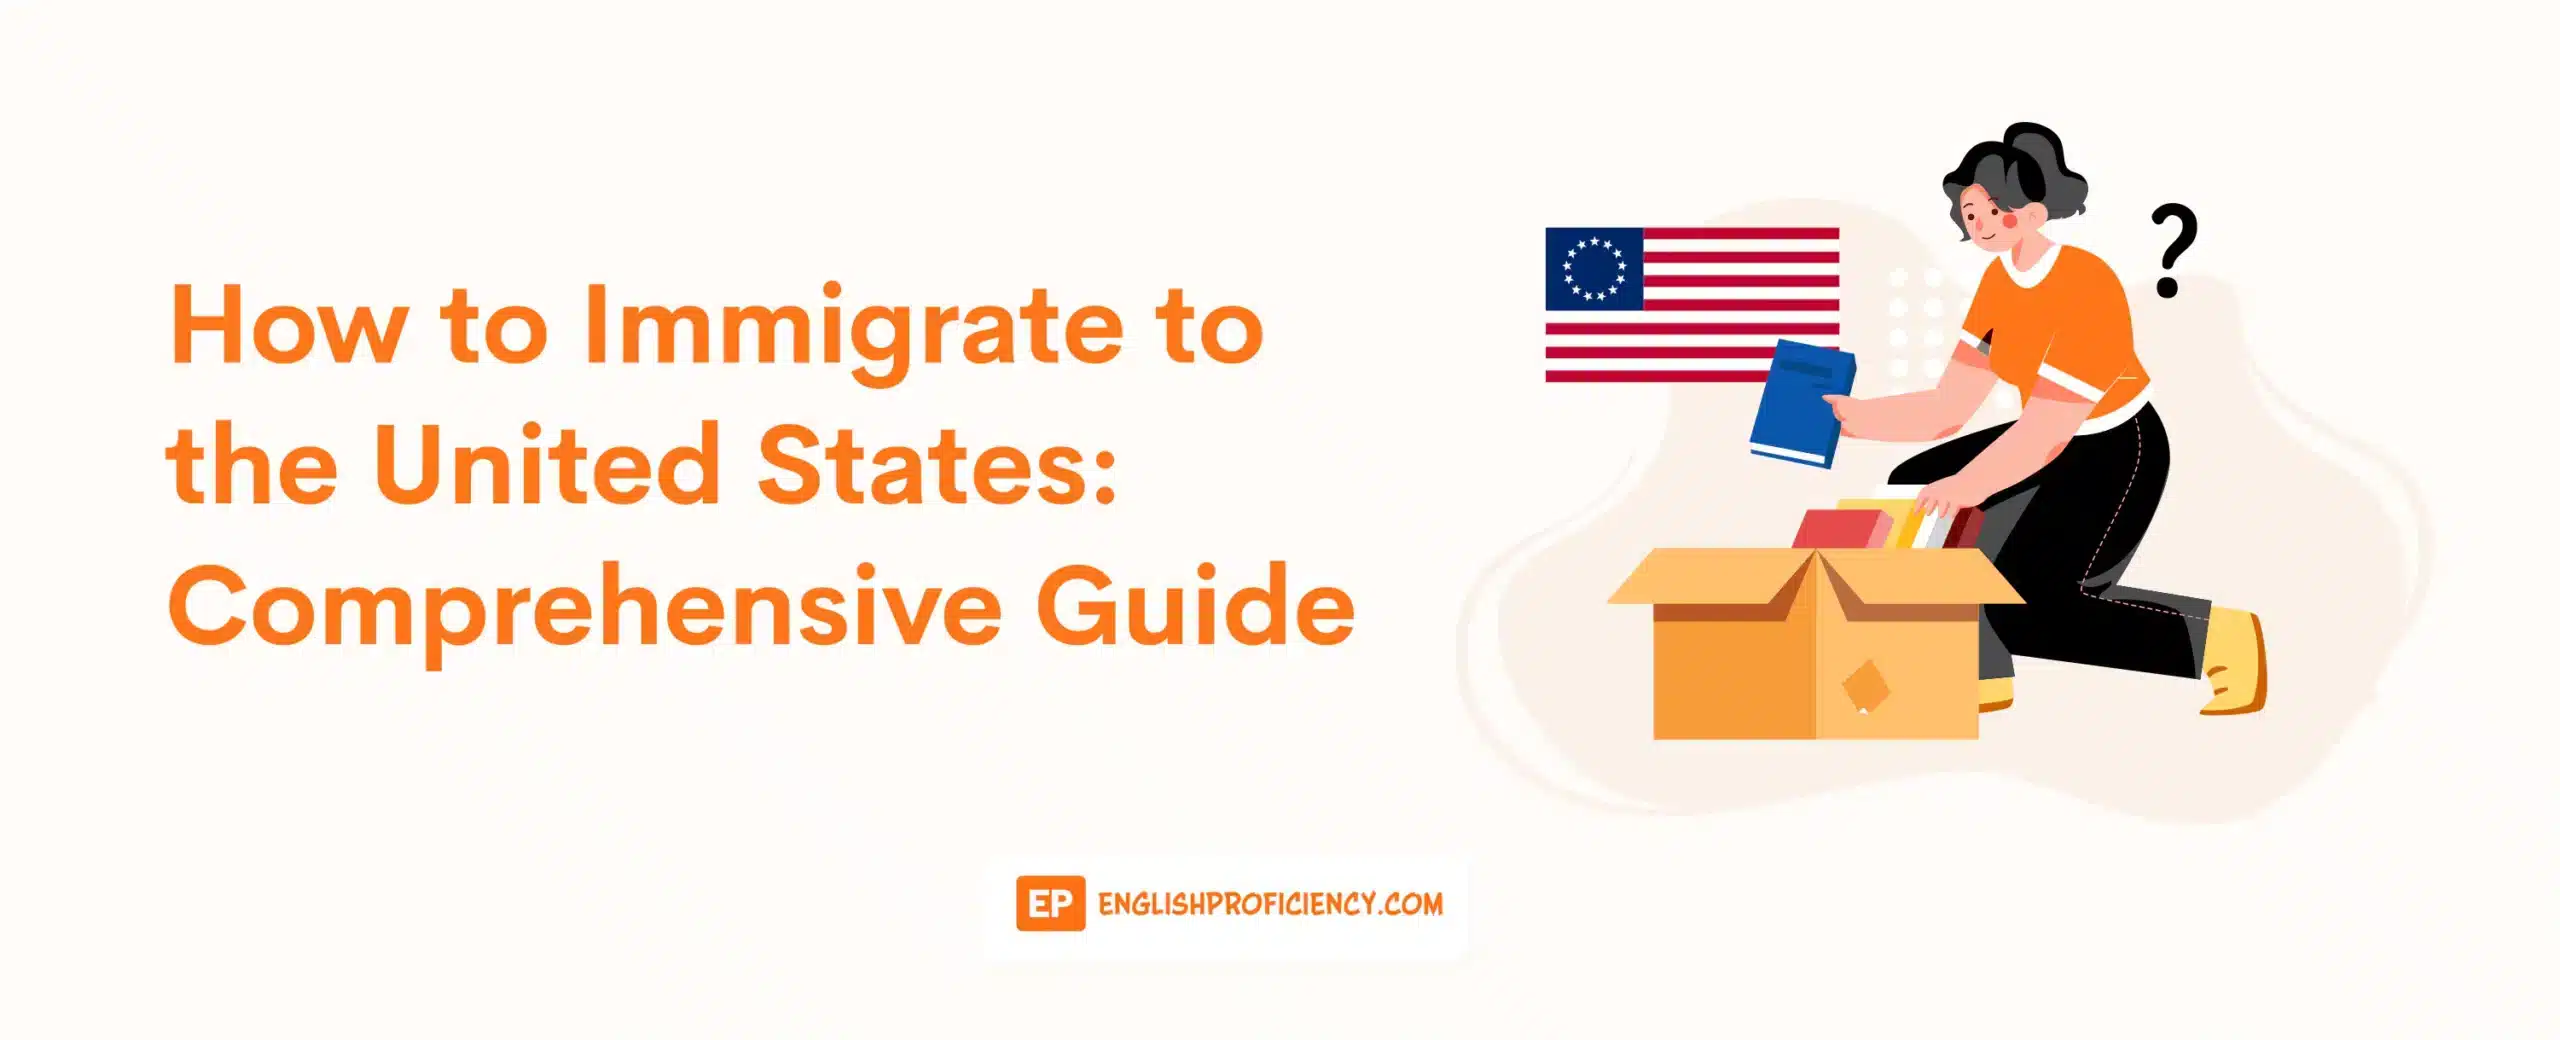 How to Immigrate to the United States Comprehensive Guide